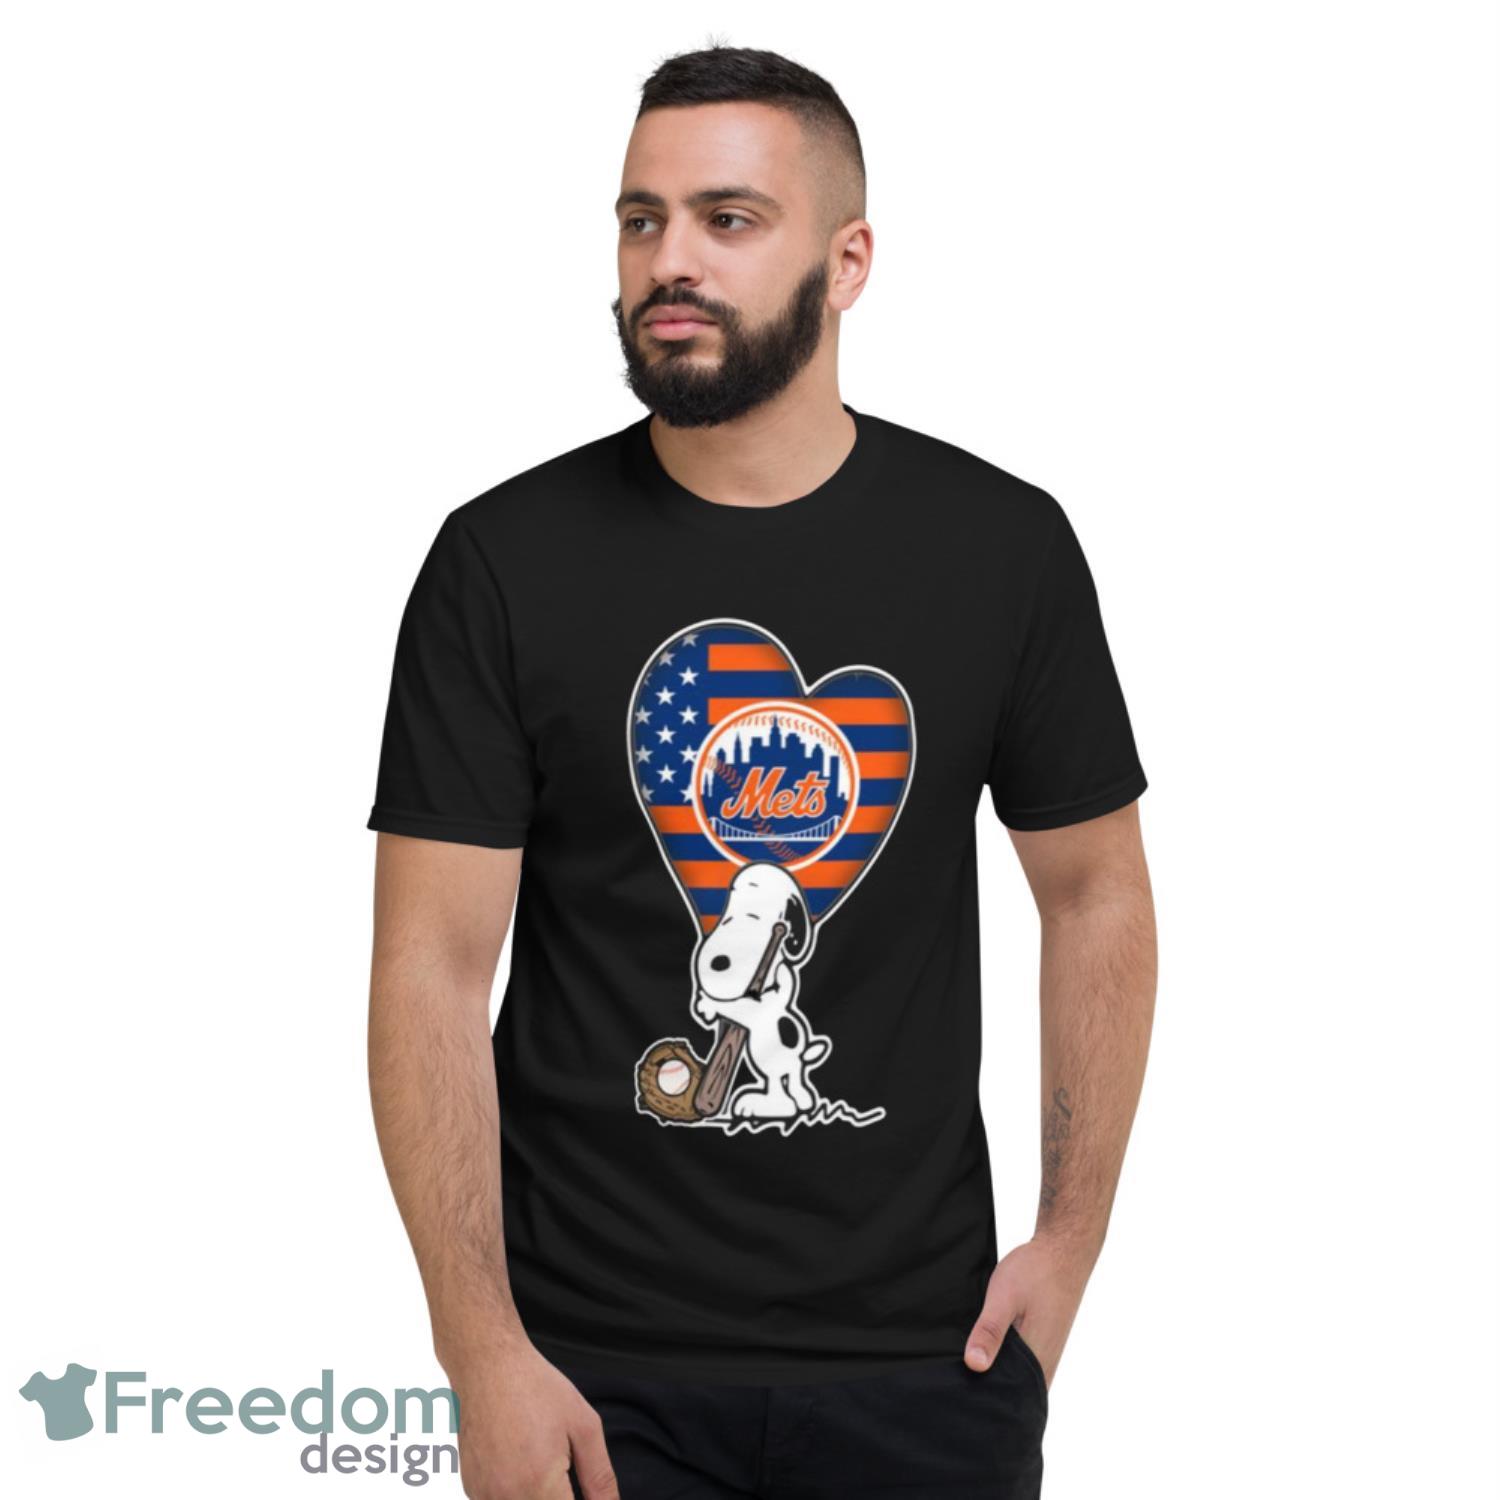 New York Mets MLB Baseball The Peanuts Movie Adorable Snoopy T